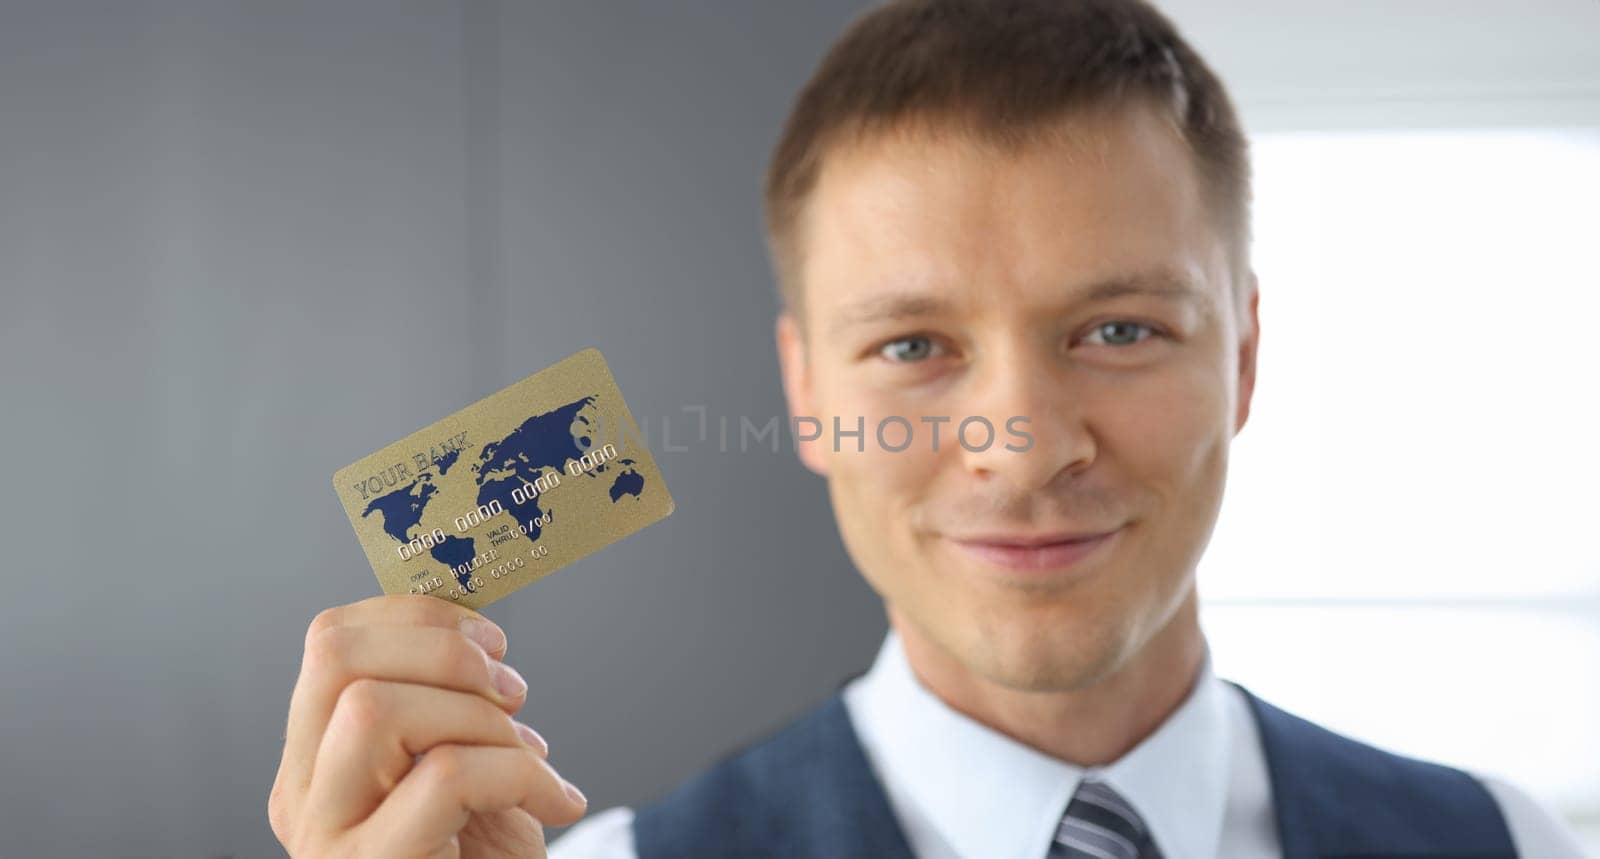 Gold bank card with letters and numbers close-up. Happy man hold plastic card in hand.